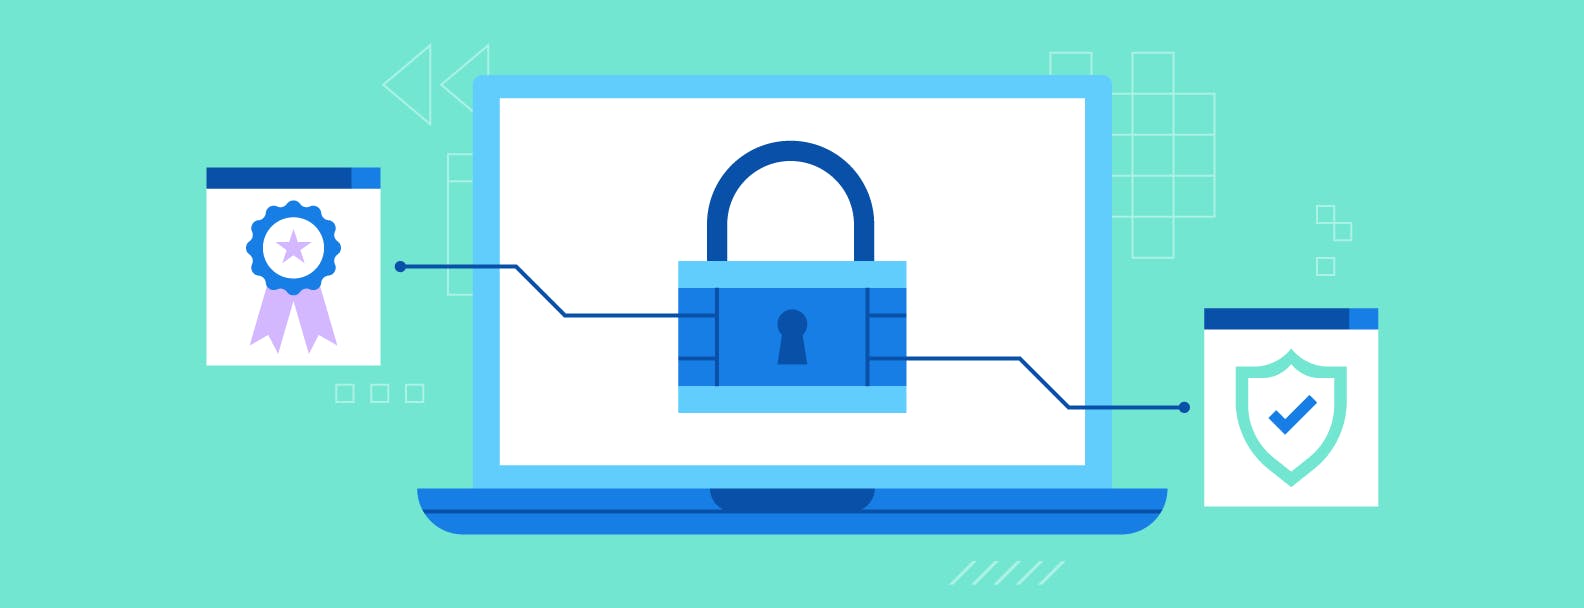 An illustrated blue padlock on a laptop with lines connecting it to a ribbon and a security shield